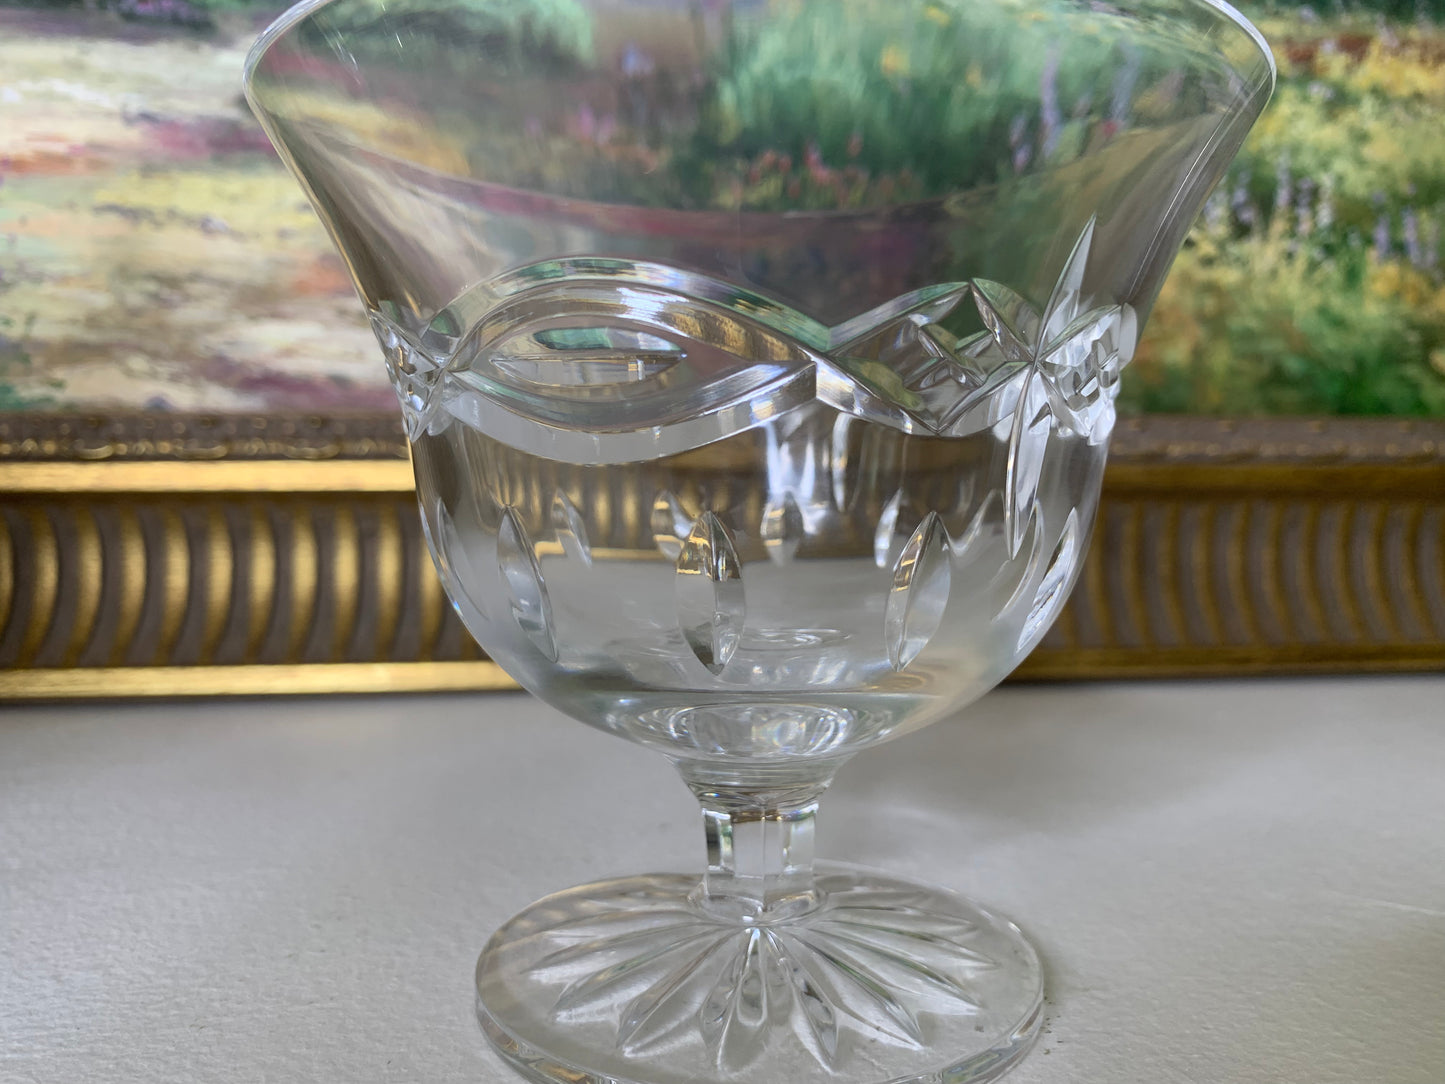 Stunning Waterford crystal Dolmen 5” footed bowl/compote - Excellent condition!